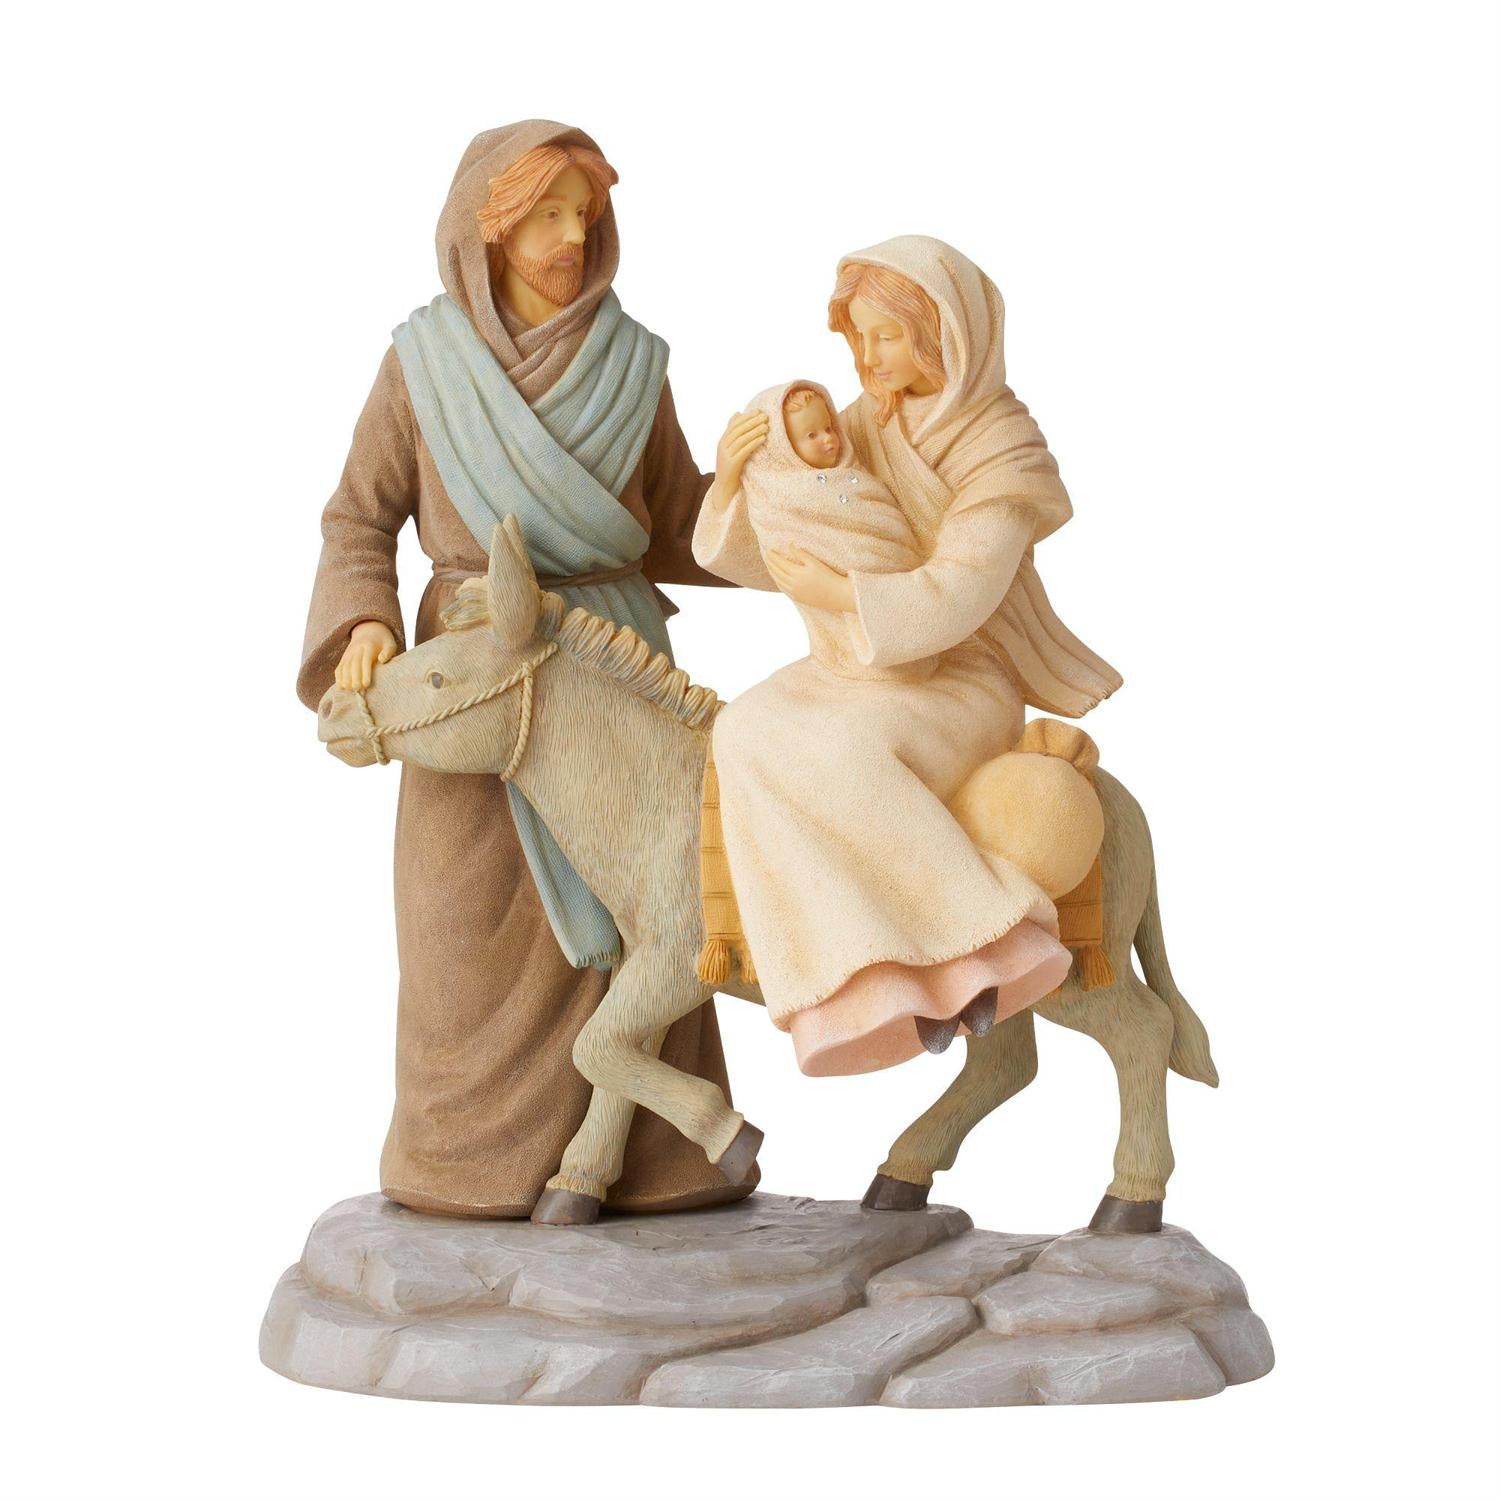 Epic Journey Figurine - Lake Norman Gifts